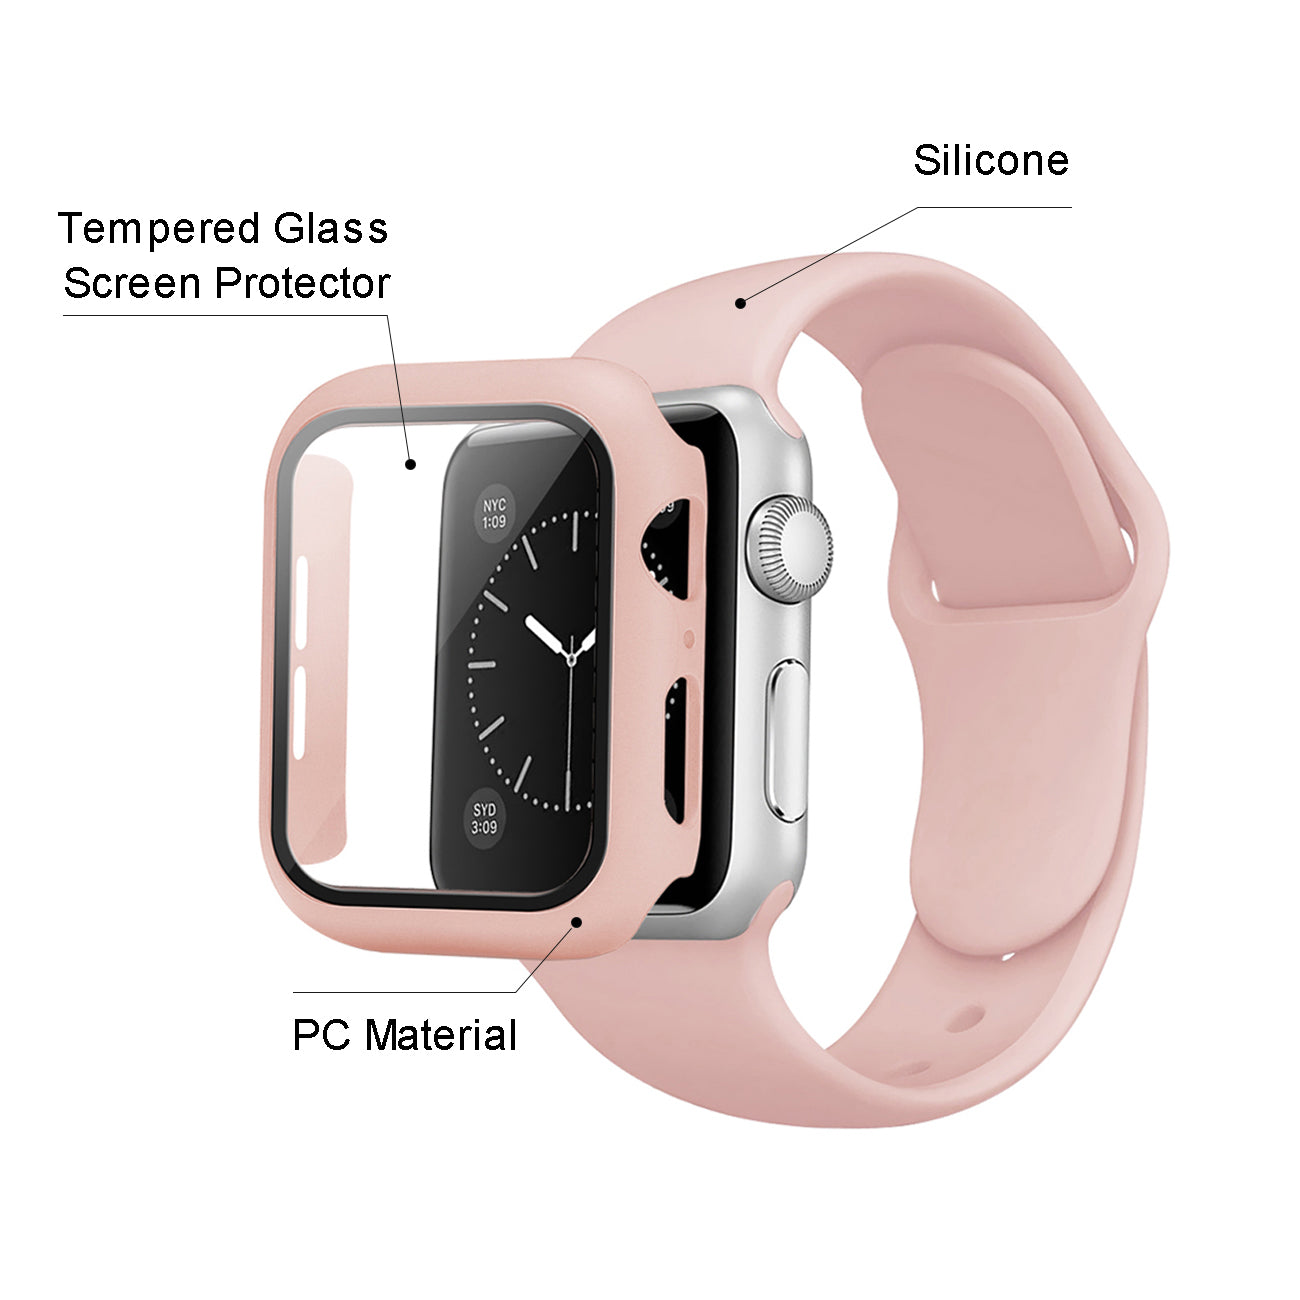 Watch Case PC With Glass Screen Protector, Silicone Watch Band Apple Watch 42mm Pink Color